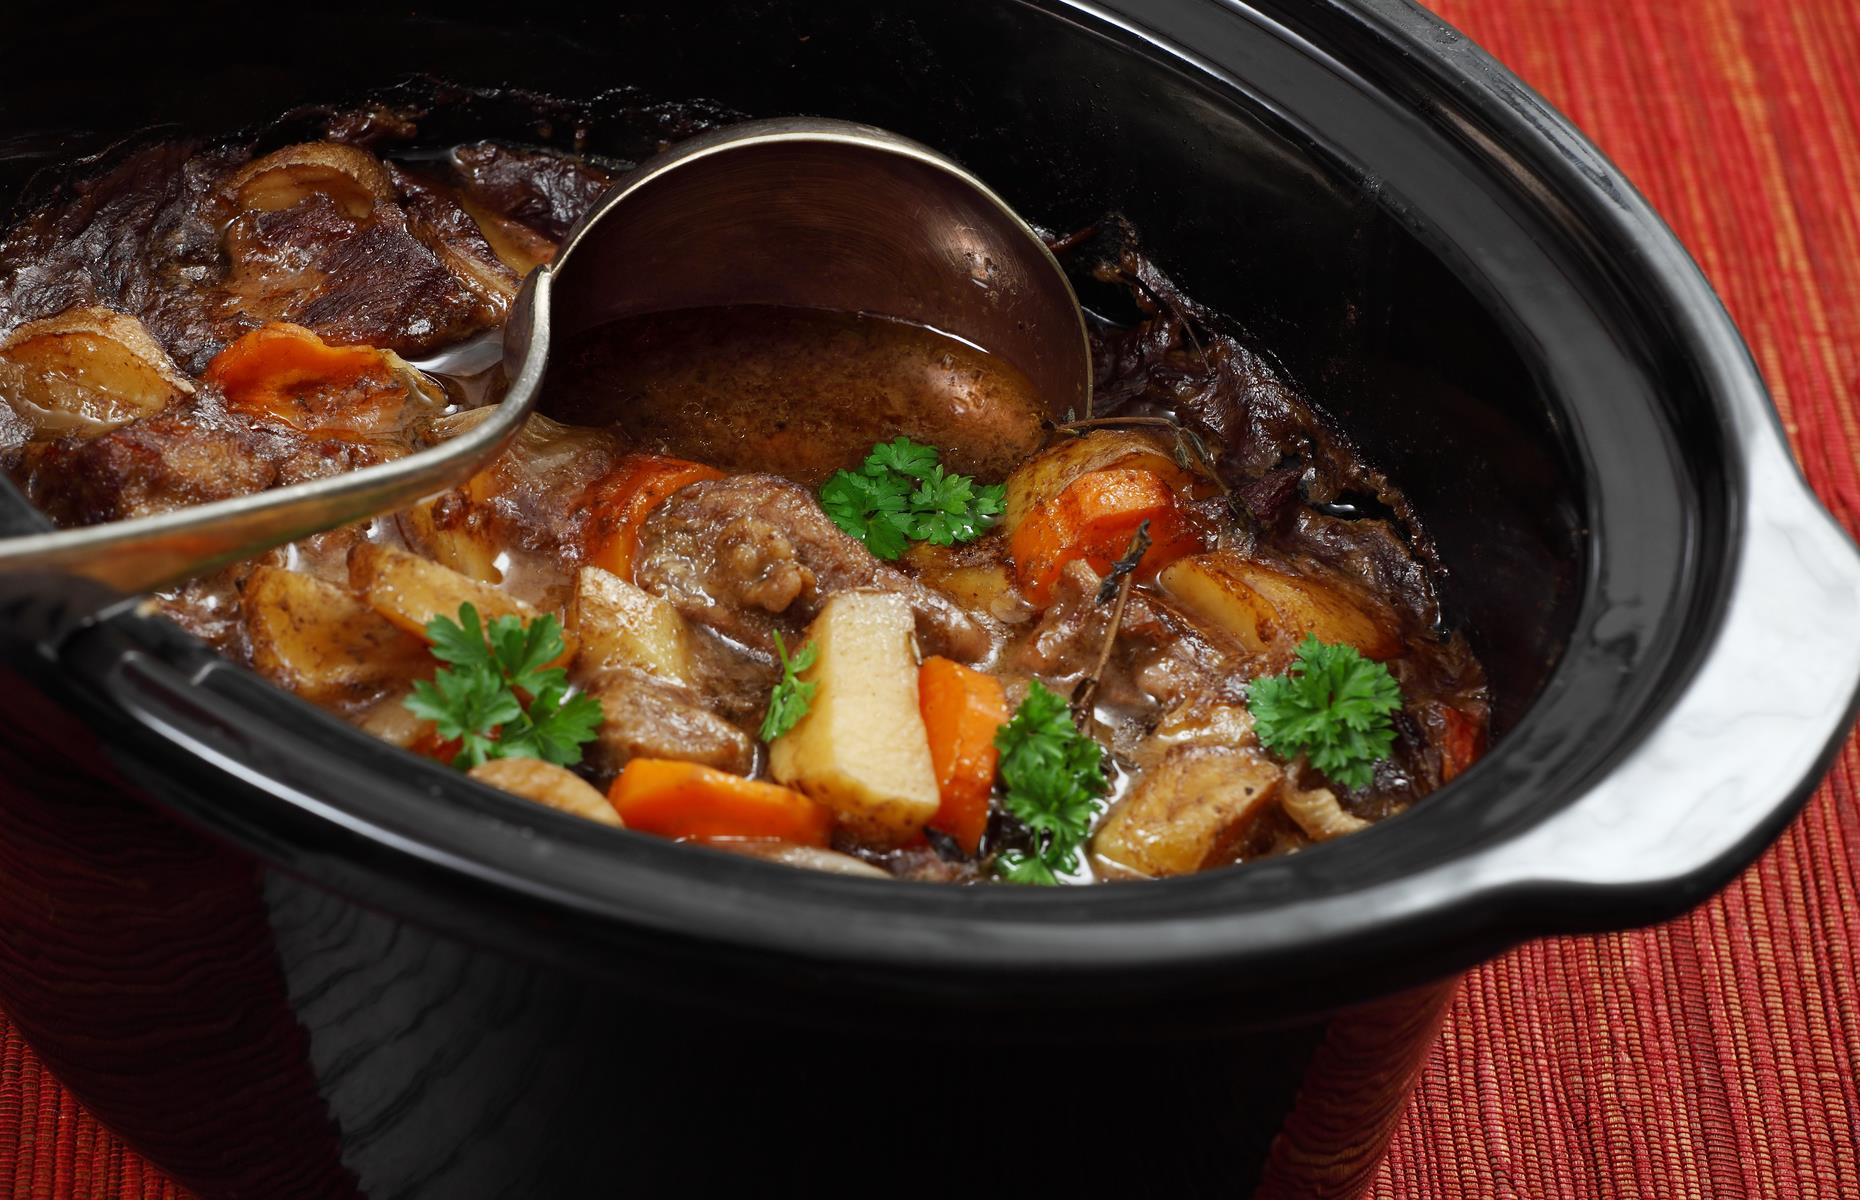 25 slow cooker hacks that MOST people don't know